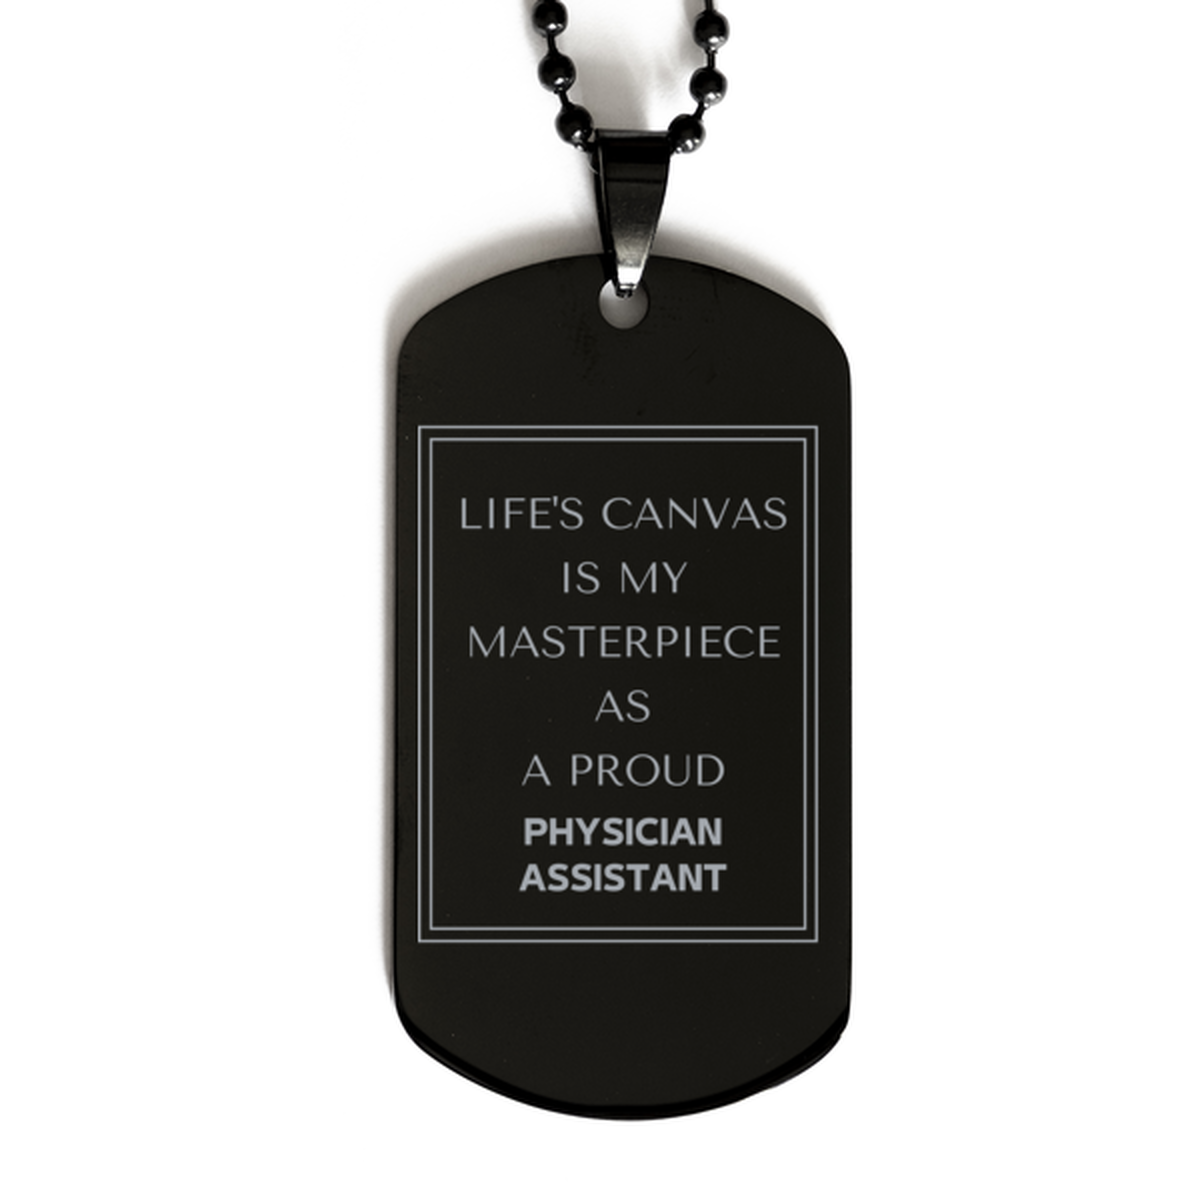 Proud Physician Assistant Gifts, Life's canvas is my masterpiece, Epic Birthday Christmas Unique Black Dog Tag For Physician Assistant, Coworkers, Men, Women, Friends